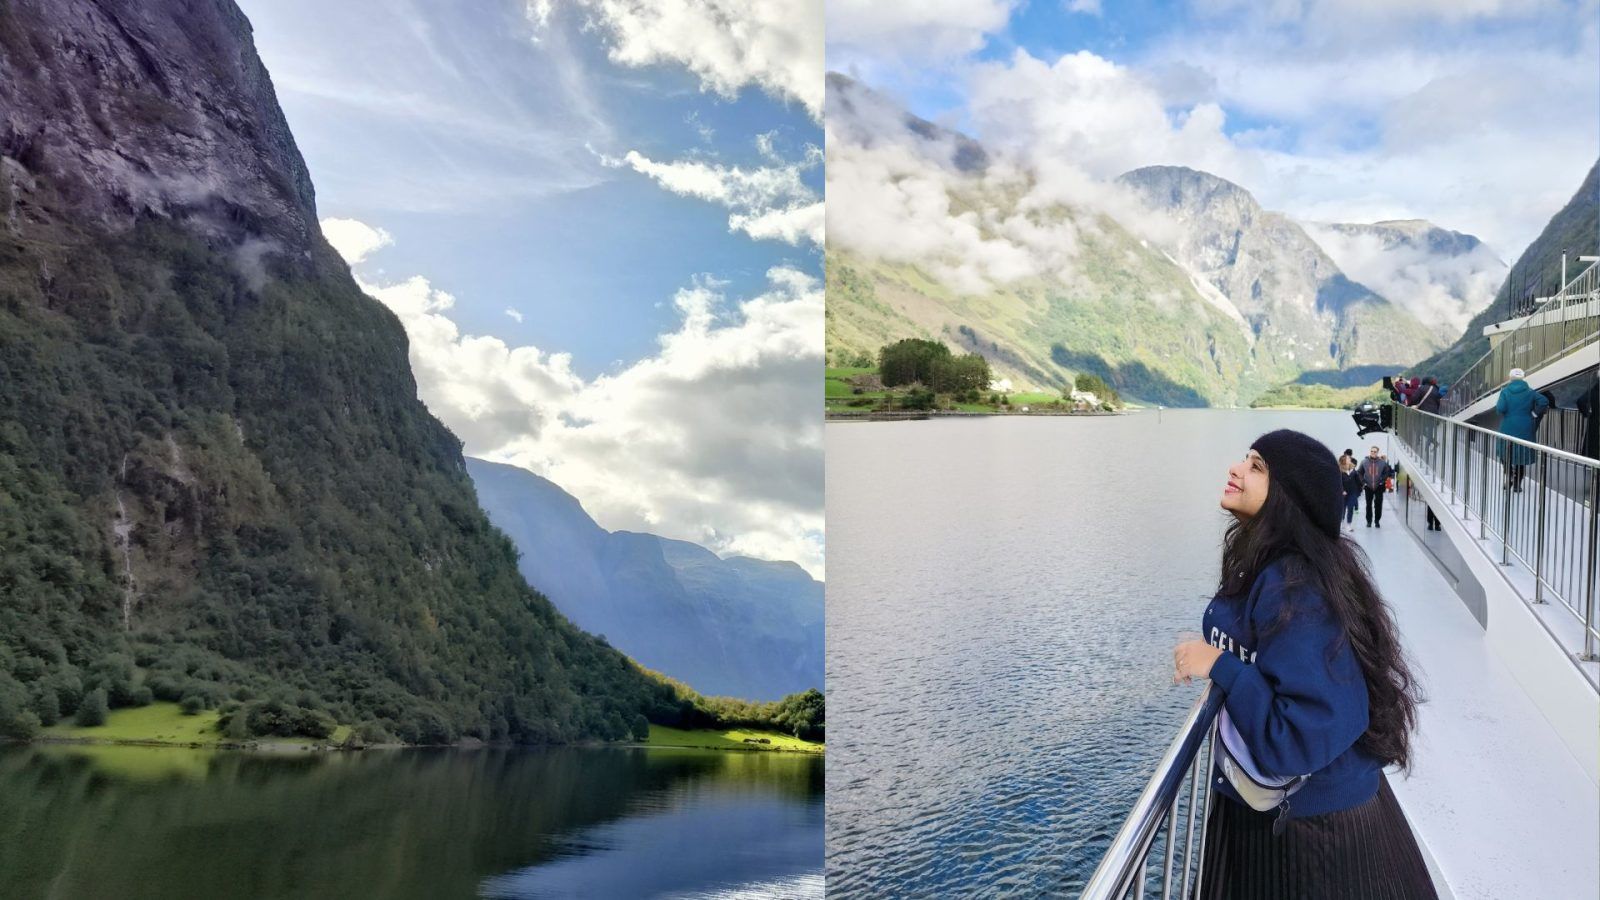 Fjord Cruise From Norway's Bergen: Everything To Know